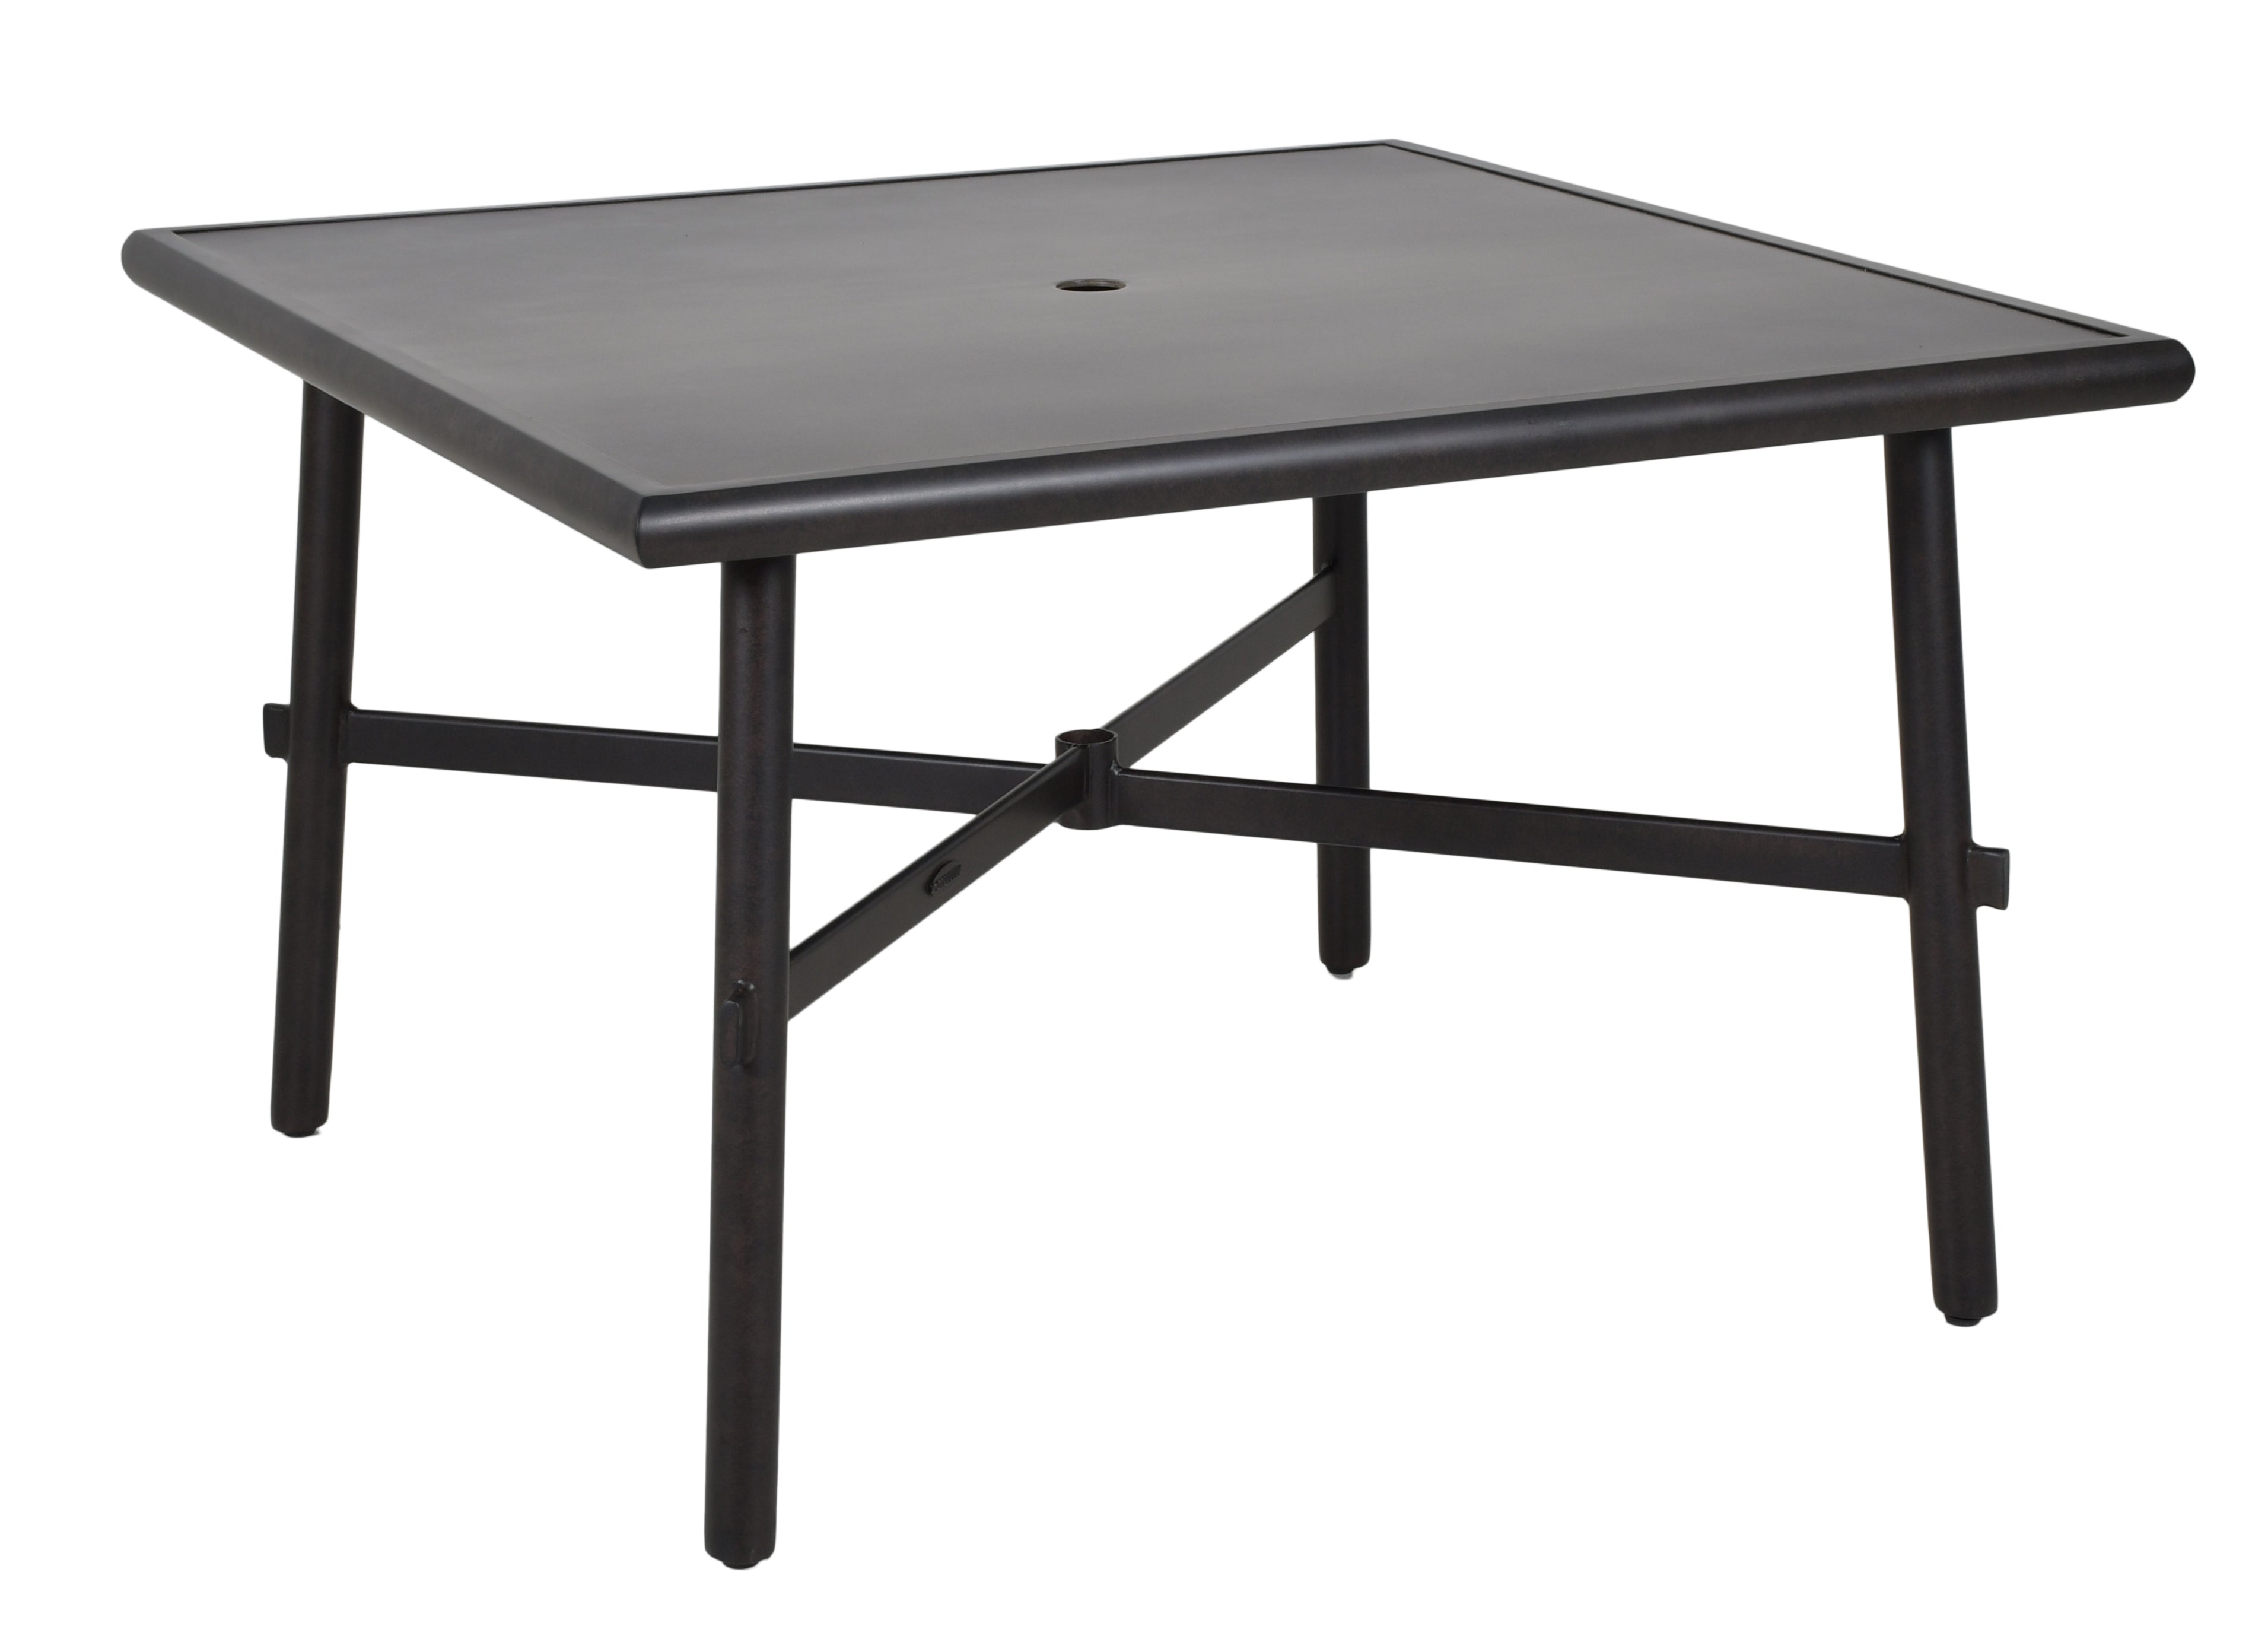 Barbados 44" Square Dining Table By Castelle